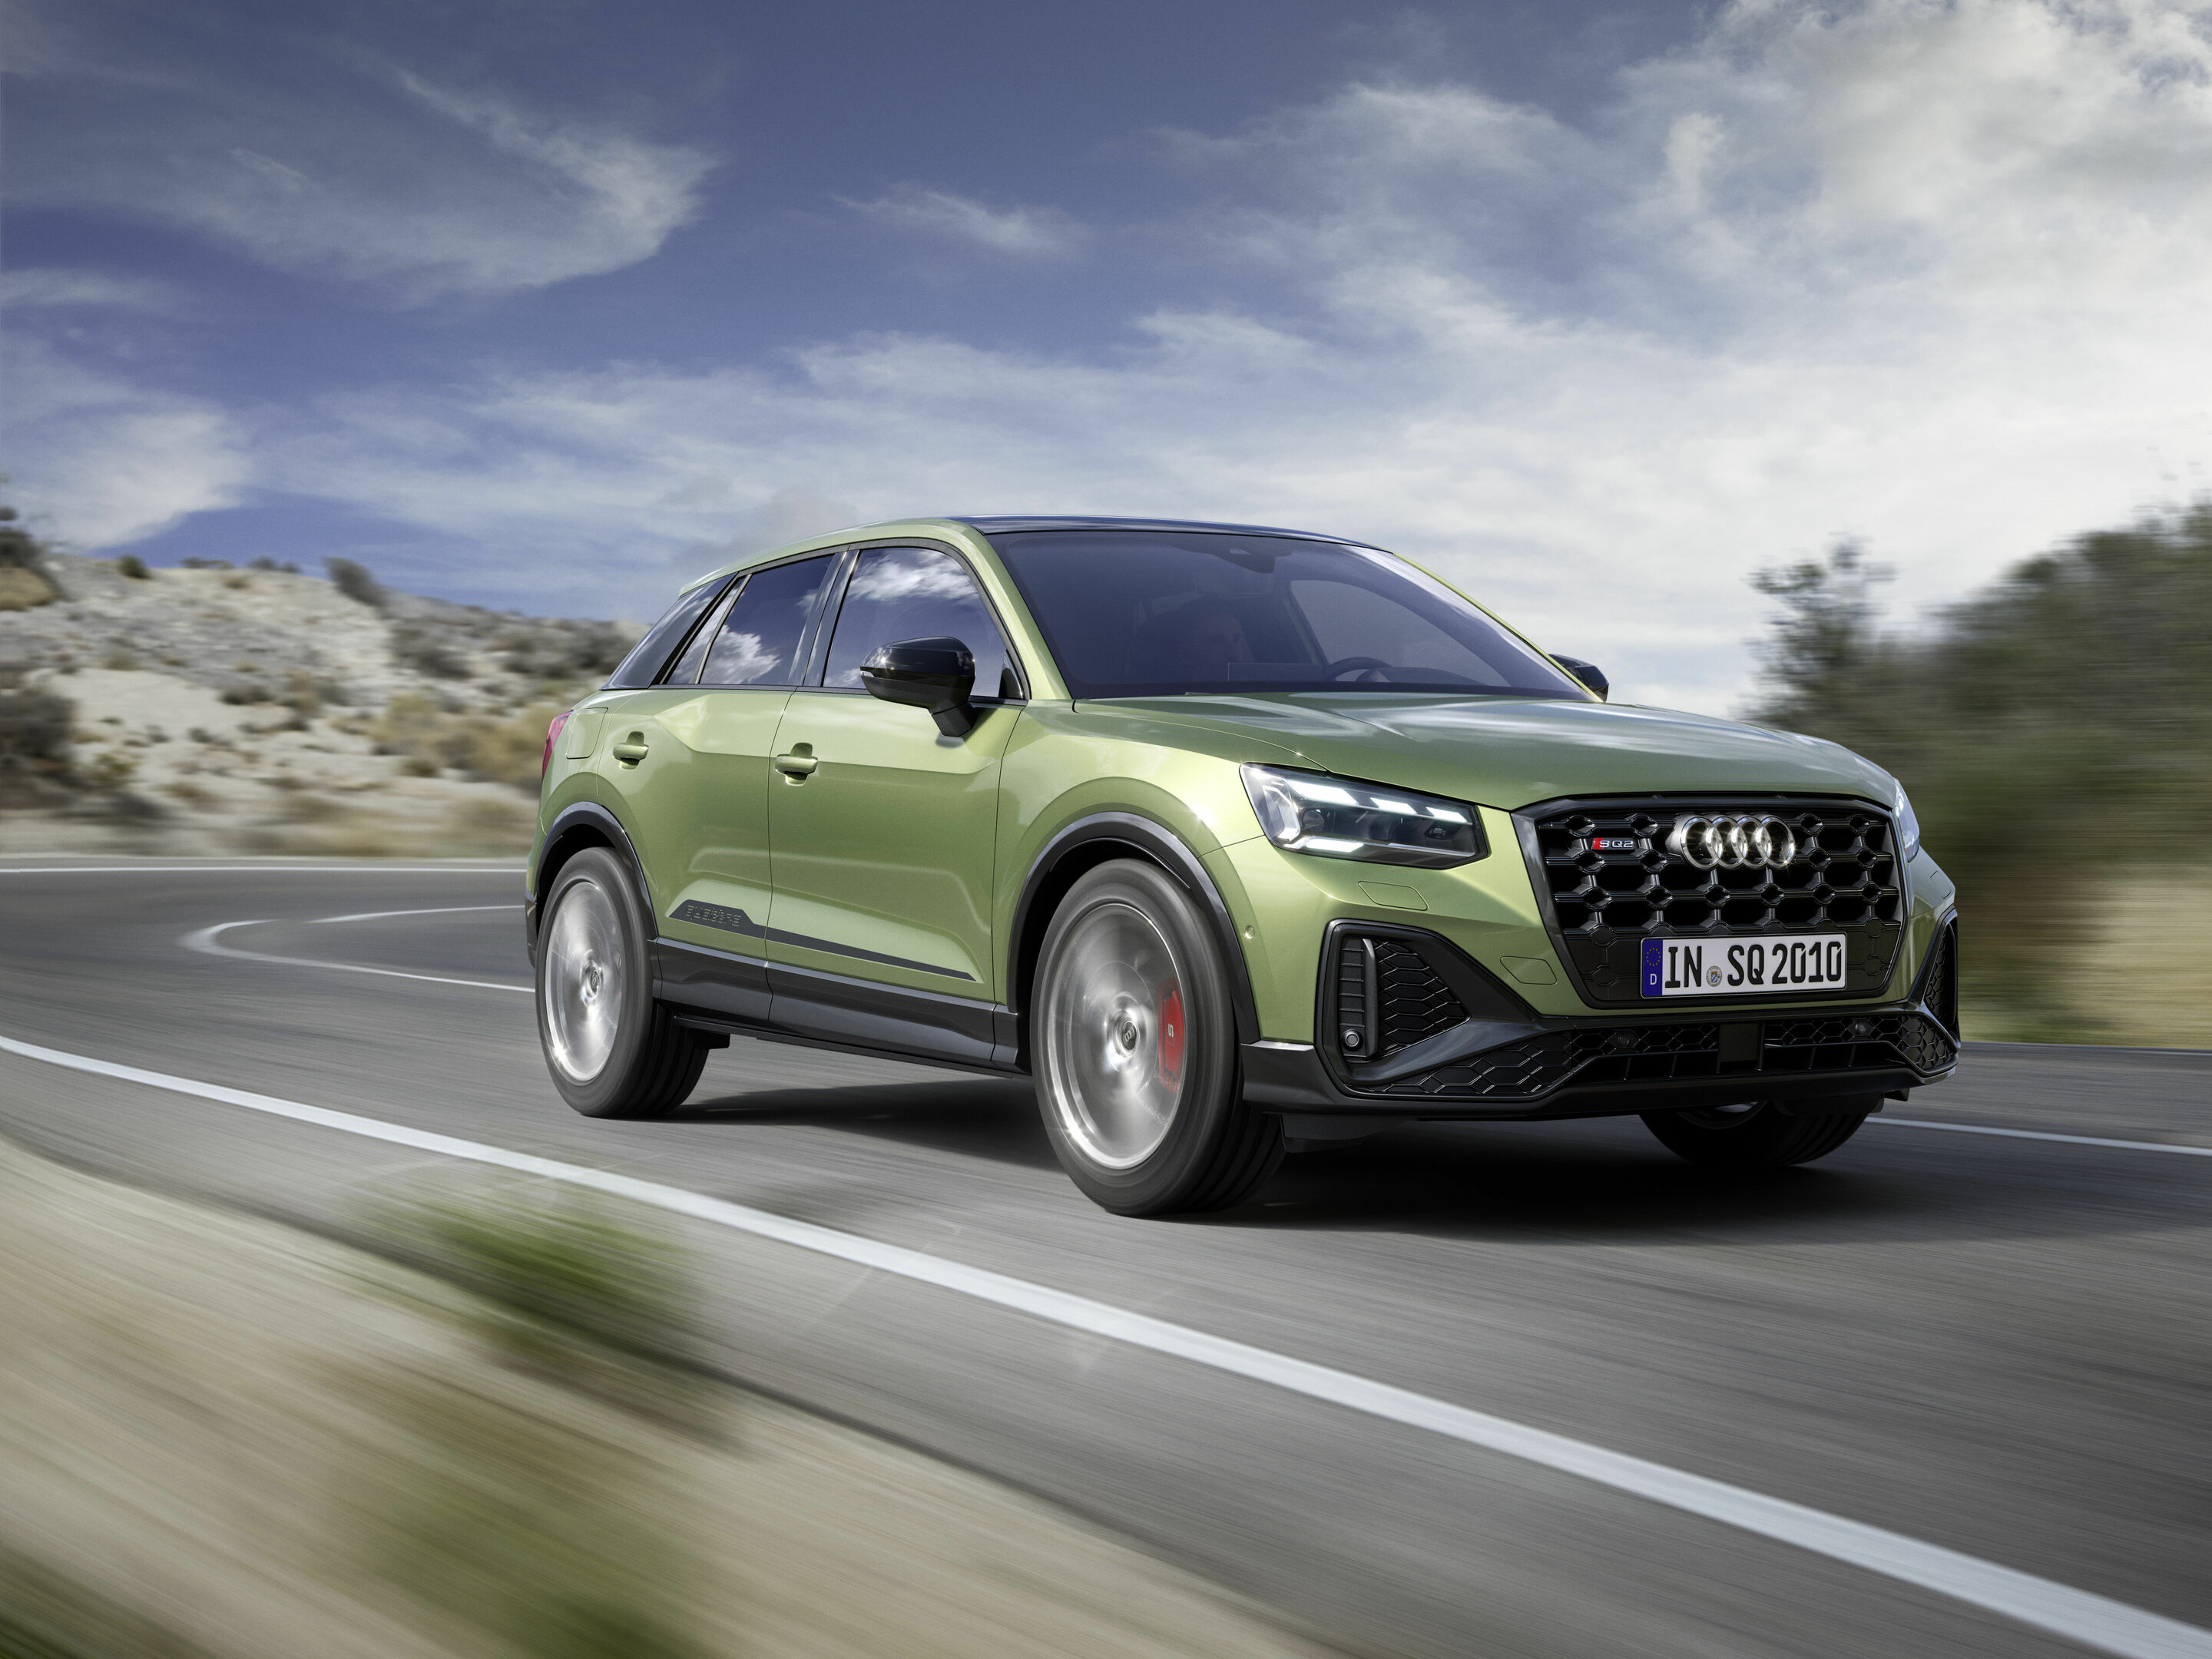 Audi Q2 Will Be Discontinued After Only One Generation: Official